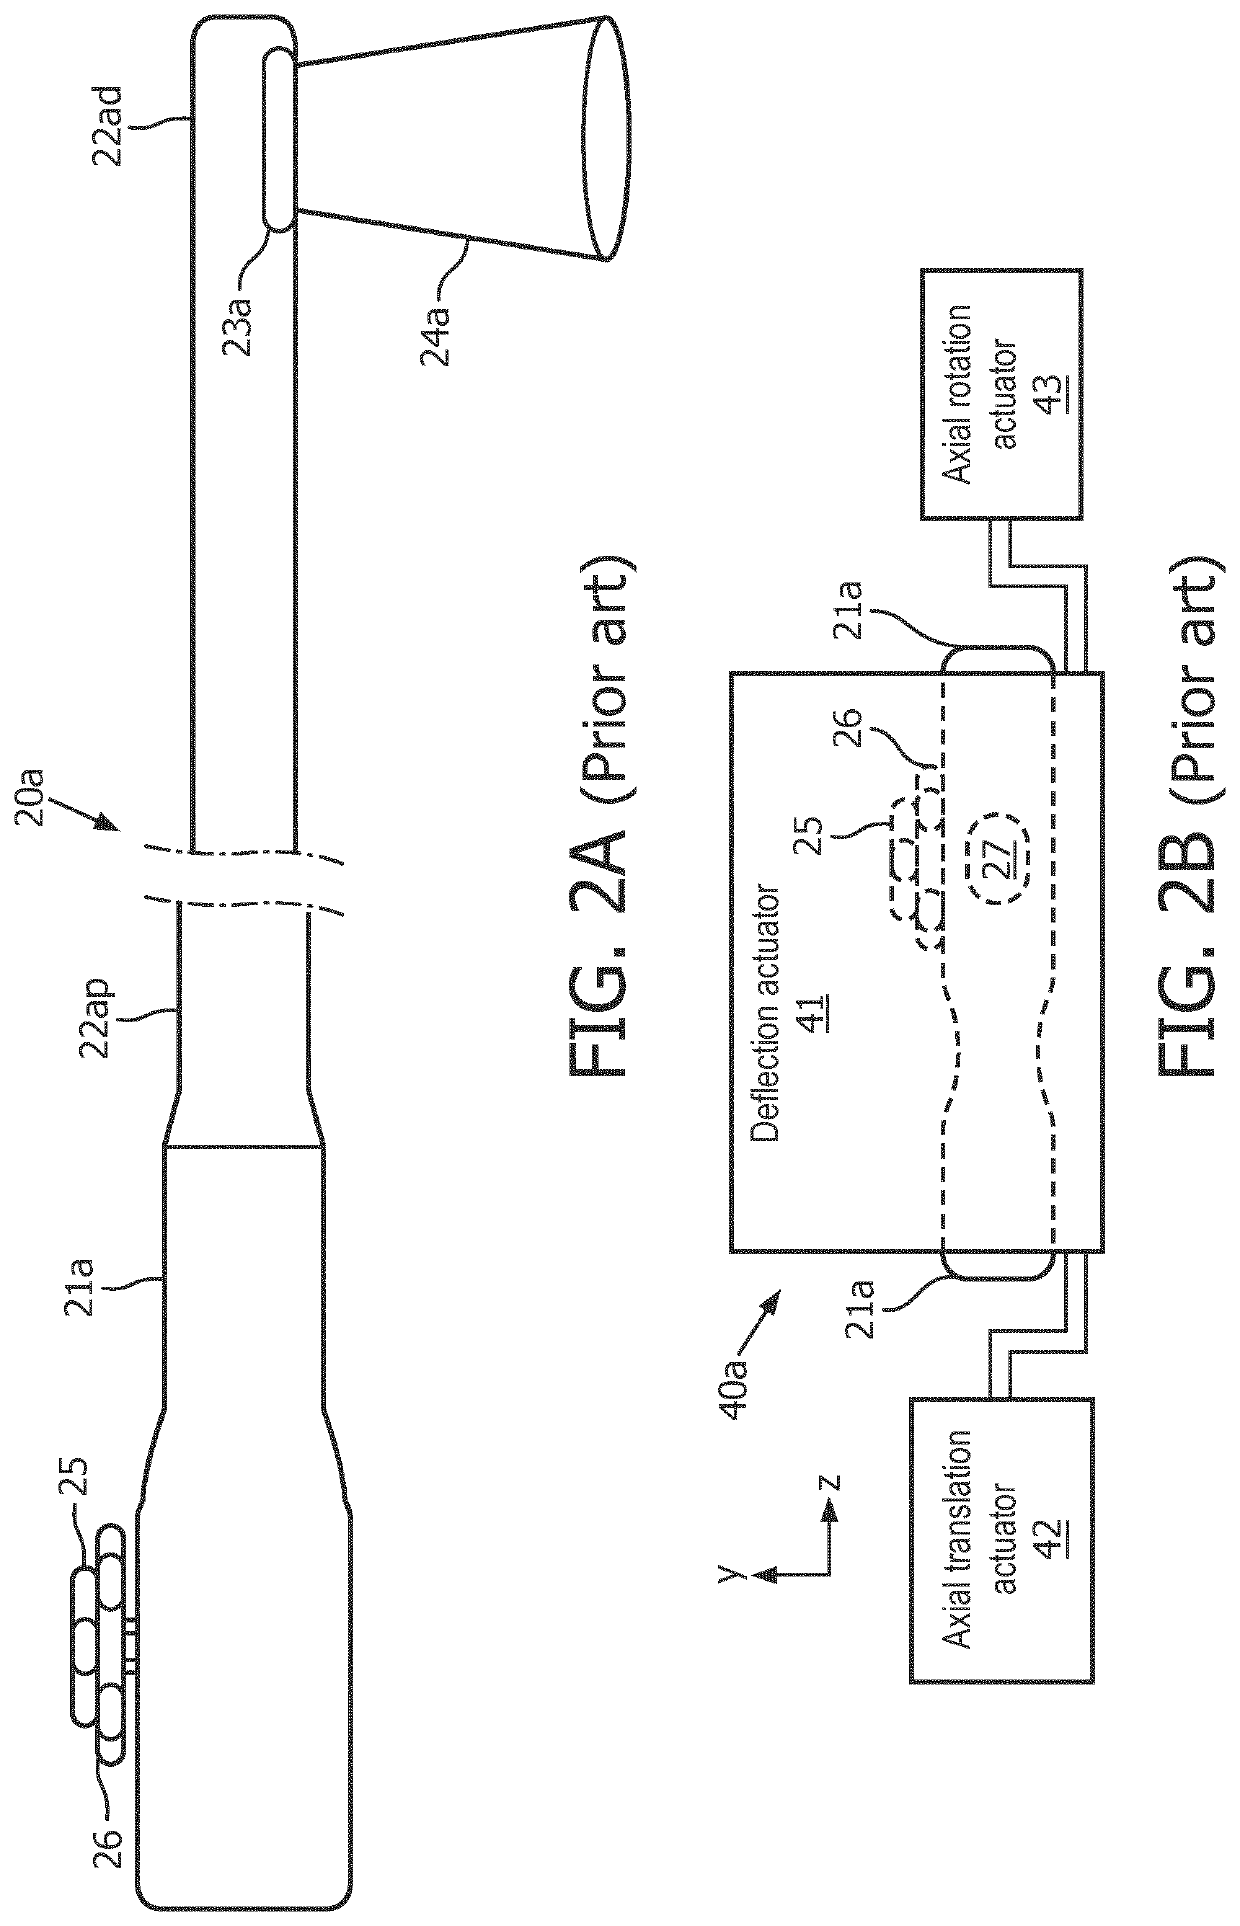 A laparoscopic adapter, an echocardiography probe and a method for coupling the adapter to the probe